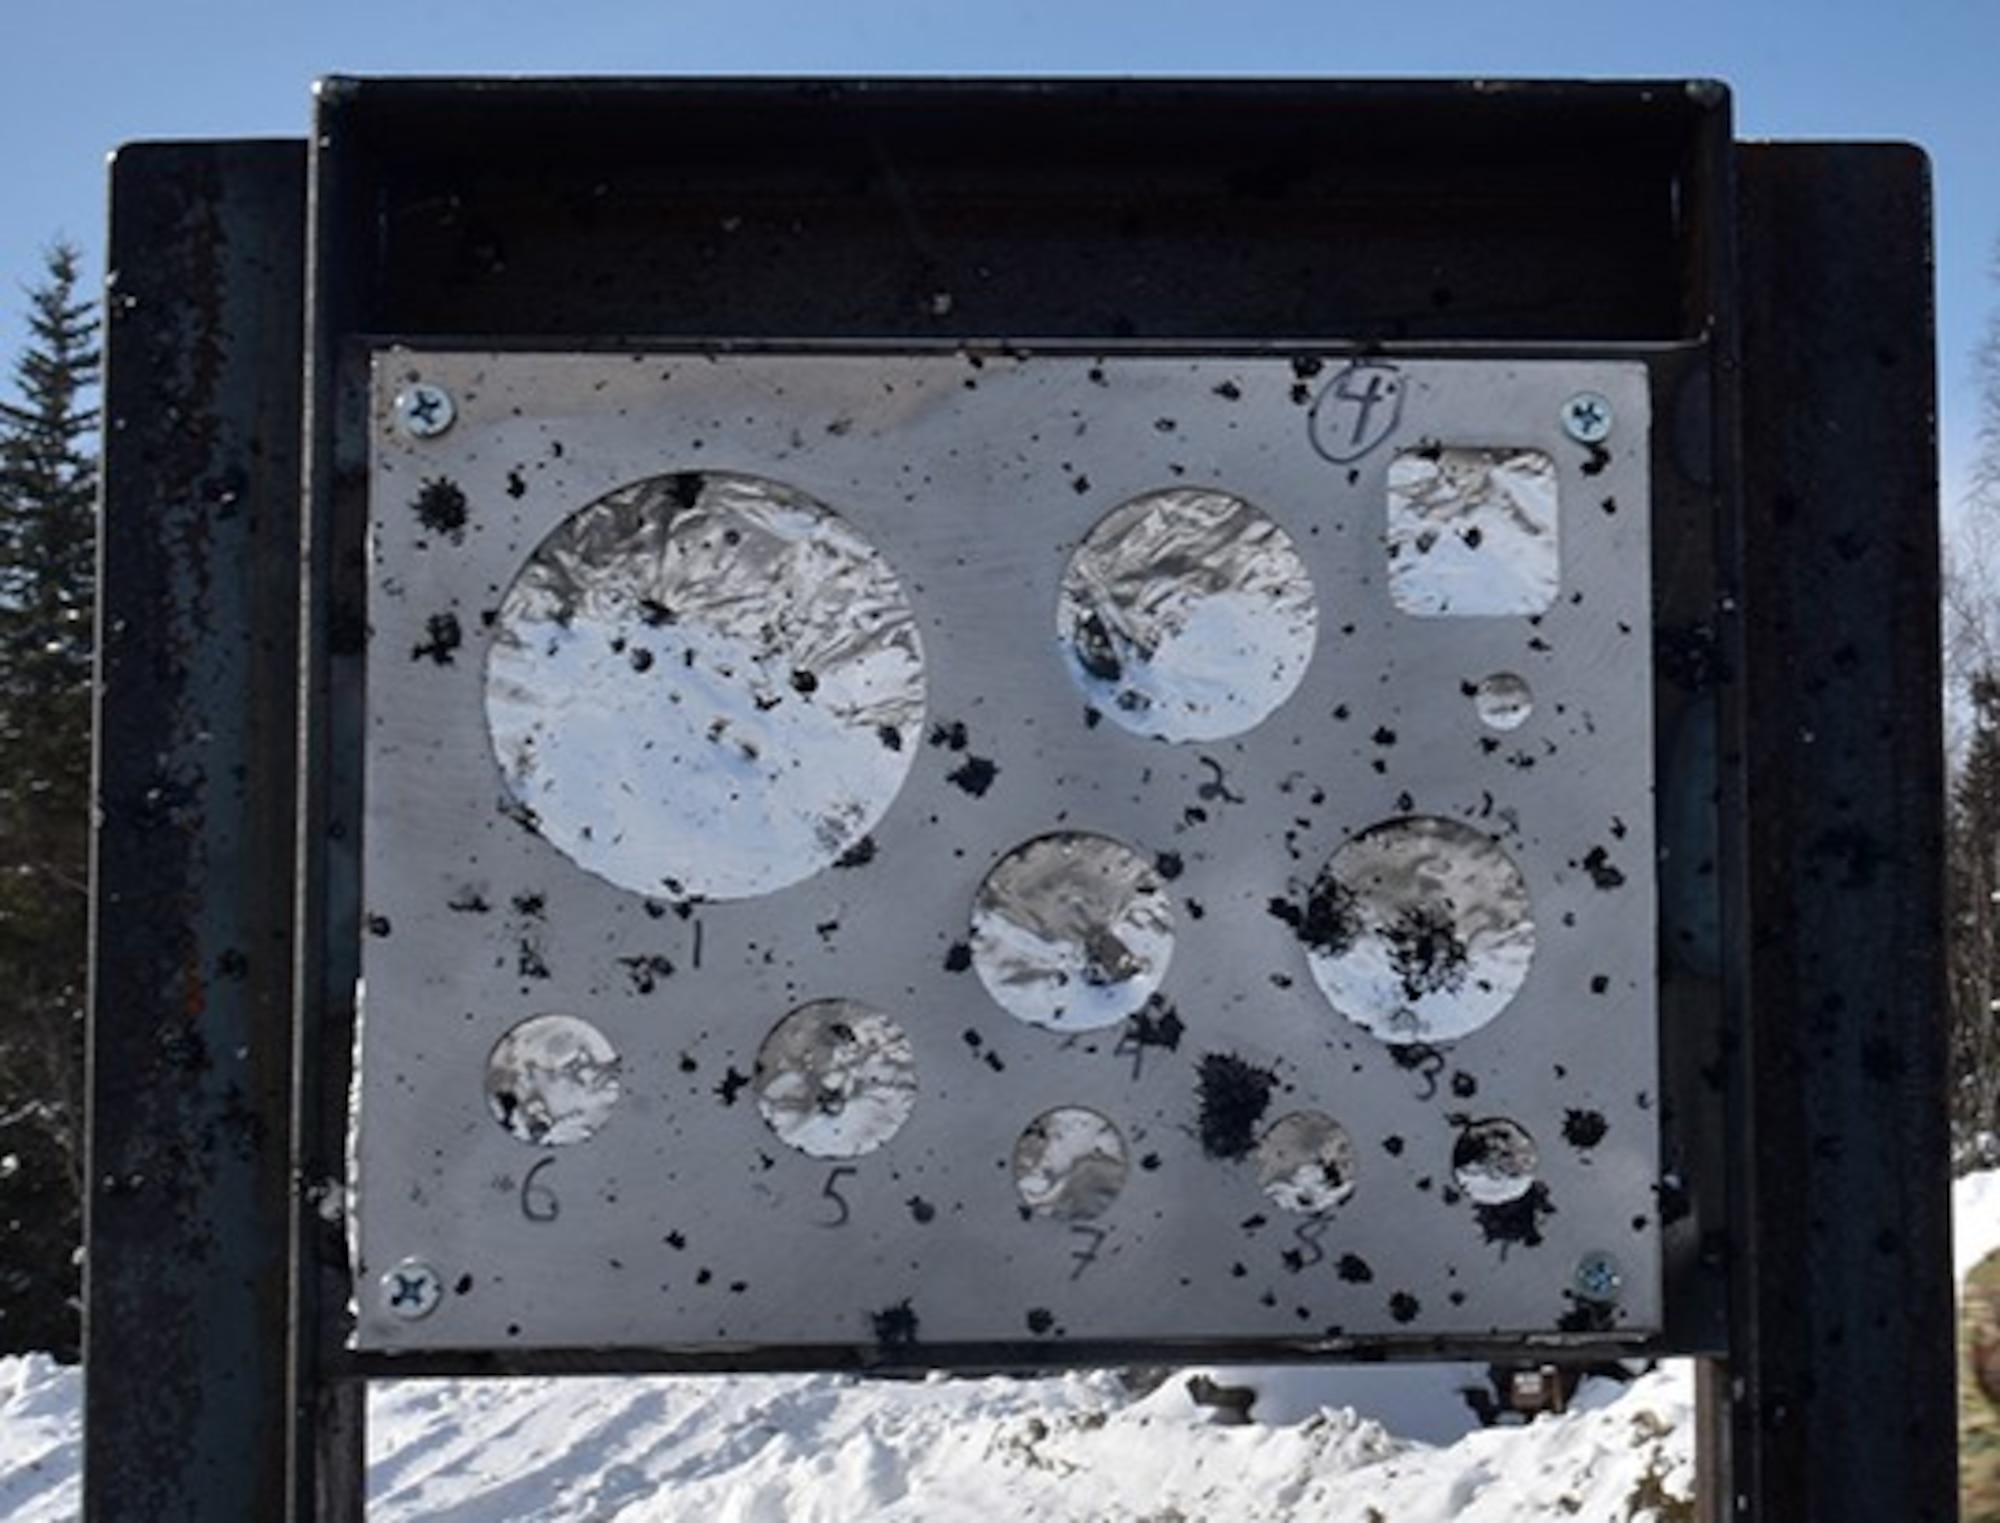 A gauge stand measures the effect of an explosion during the snow mitigation test on March 18, 2021, at Eielson Air Force Base, Alaska. The foil pieces are used to measure the blast caused by the explosion. (U.S. Air Force photo/Senior Airman Danielle Sukhlall)